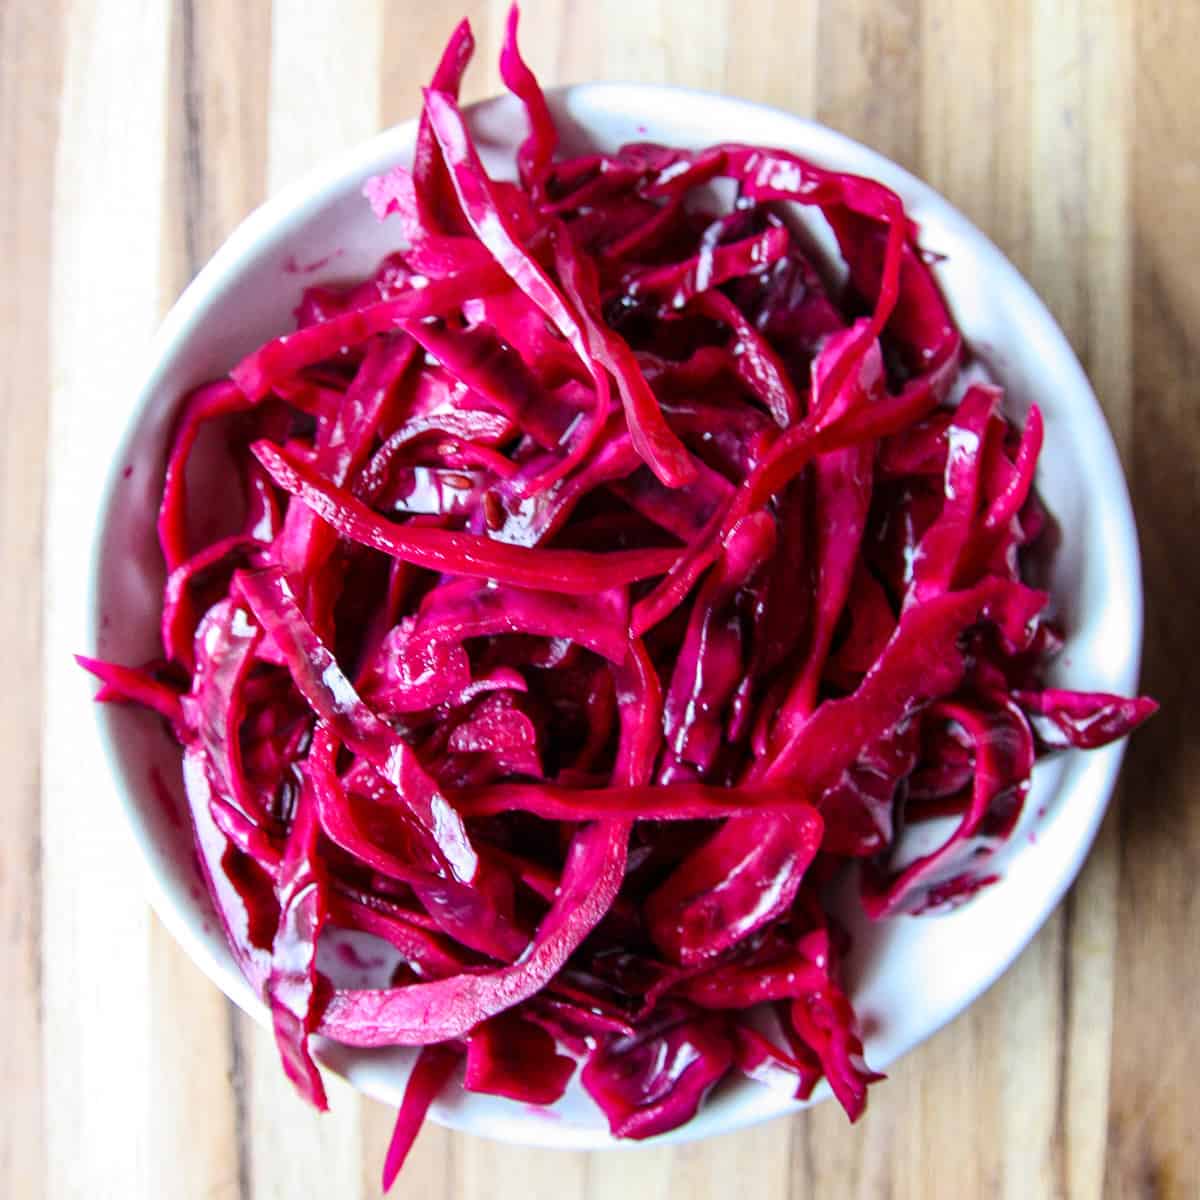 Pickled red cabbage in a white dish.